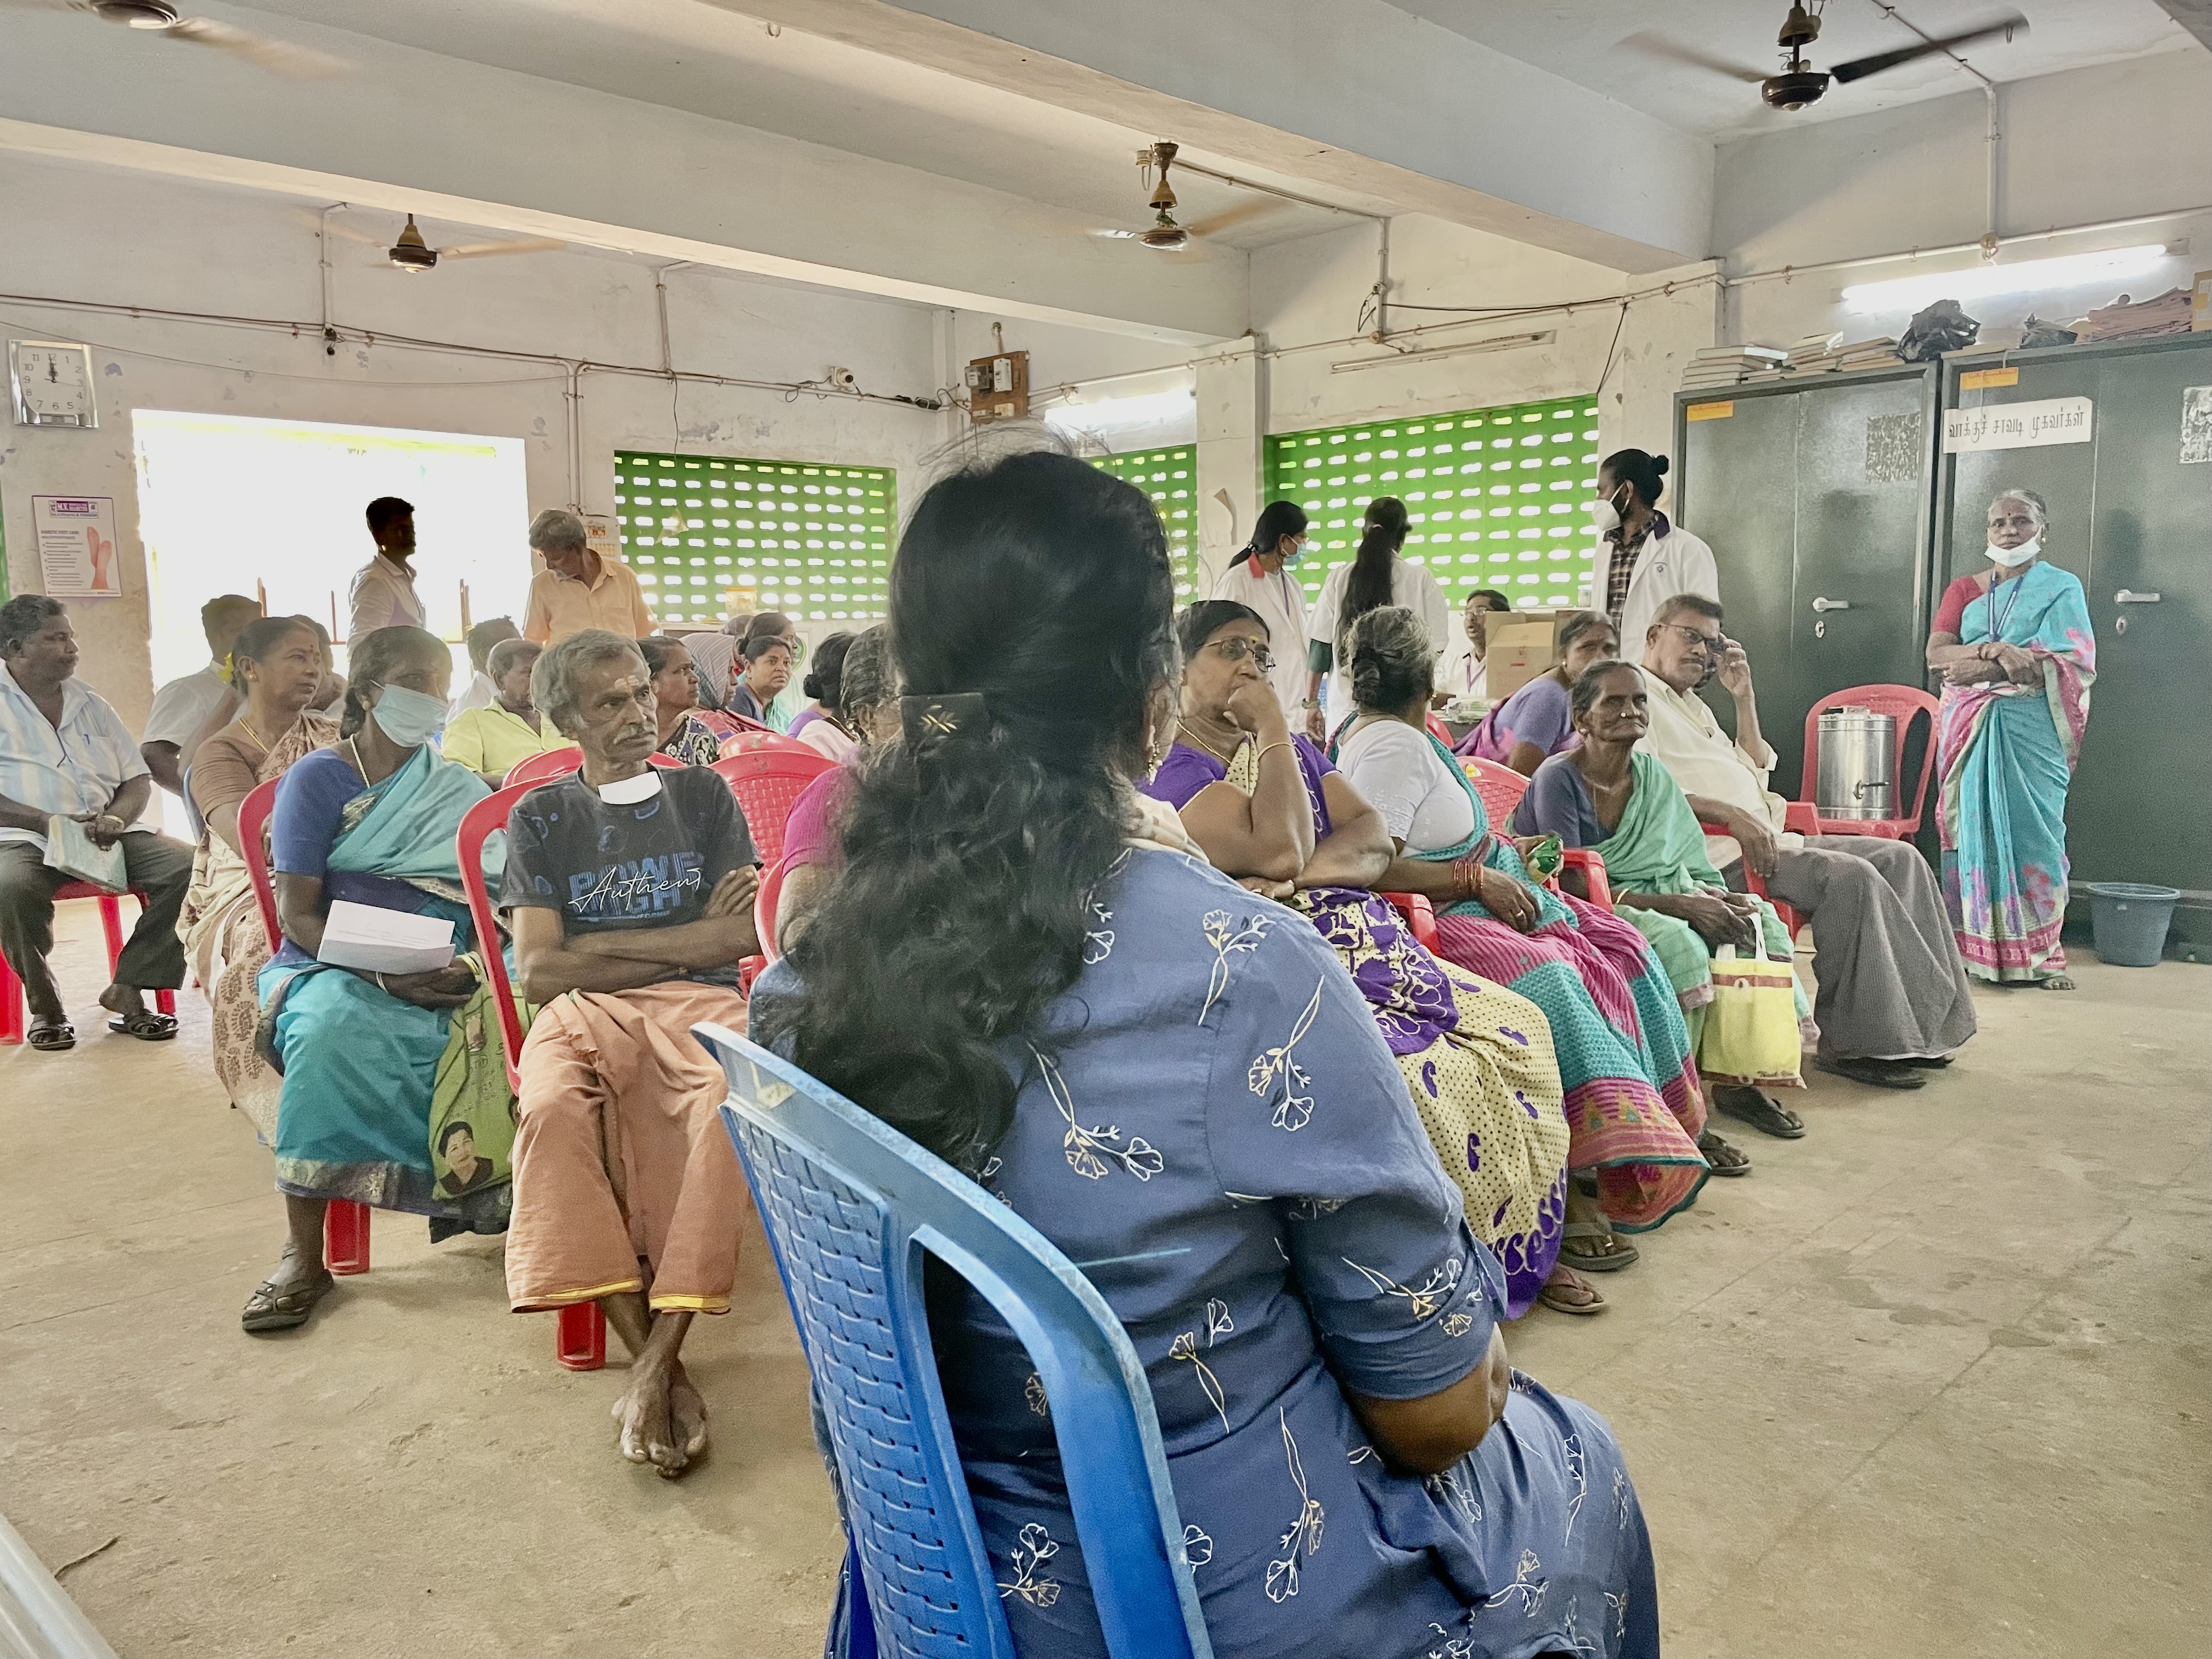 Community Center in Gummidipoondi served as the location for an information session as part of the morning “camp” for persons interested in diabetes and its complications.